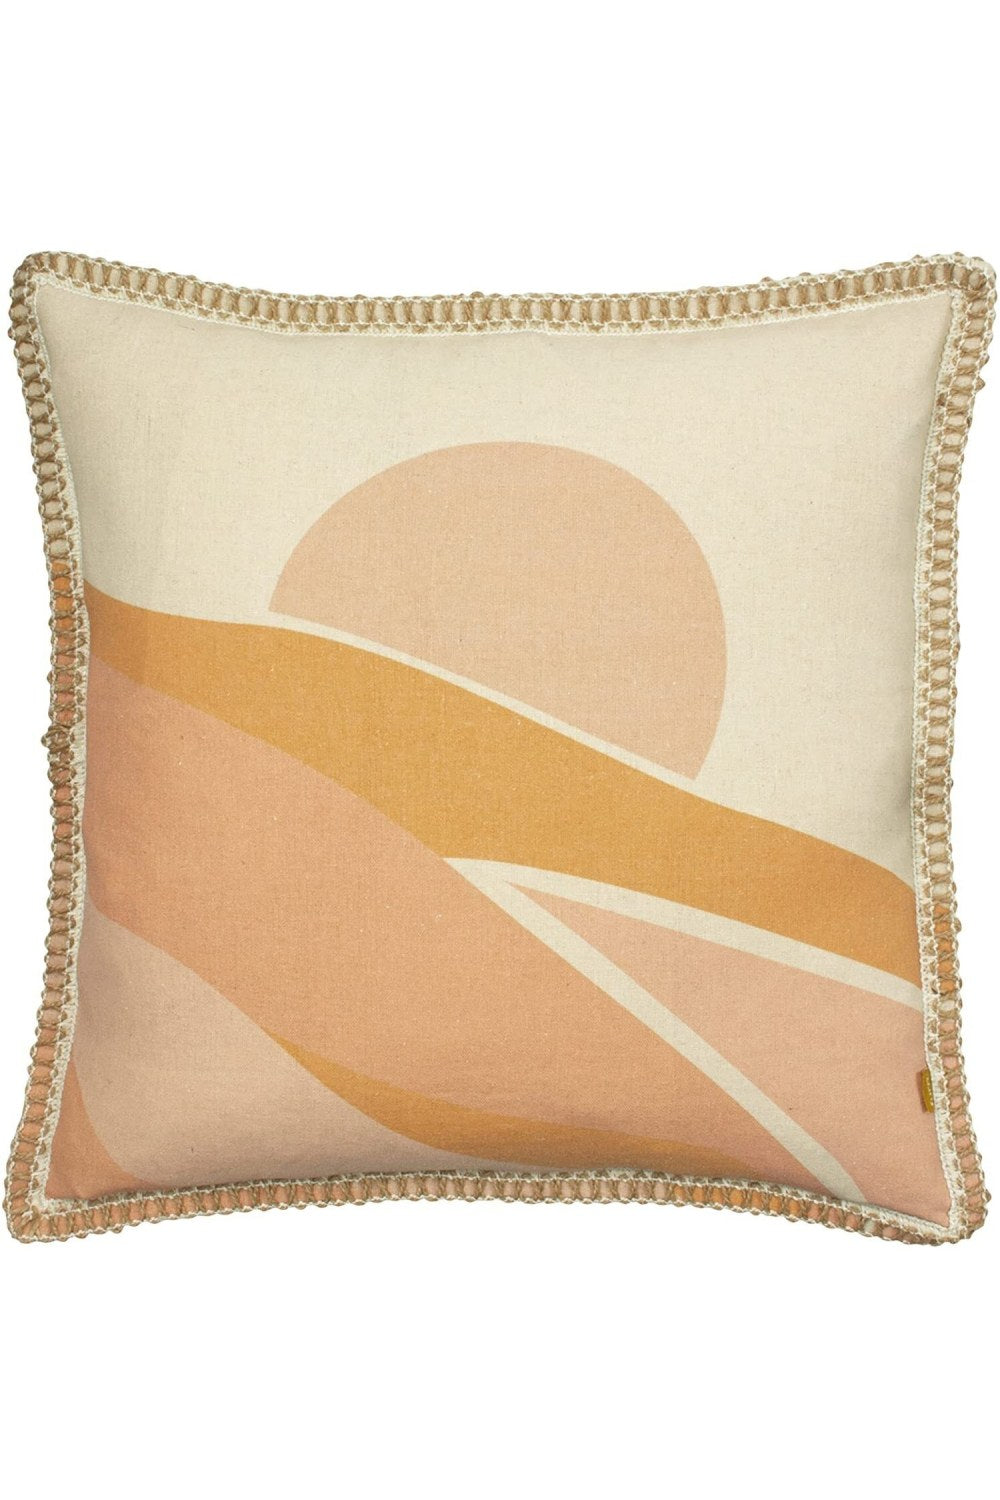 Mojave Throw Pillow Cover